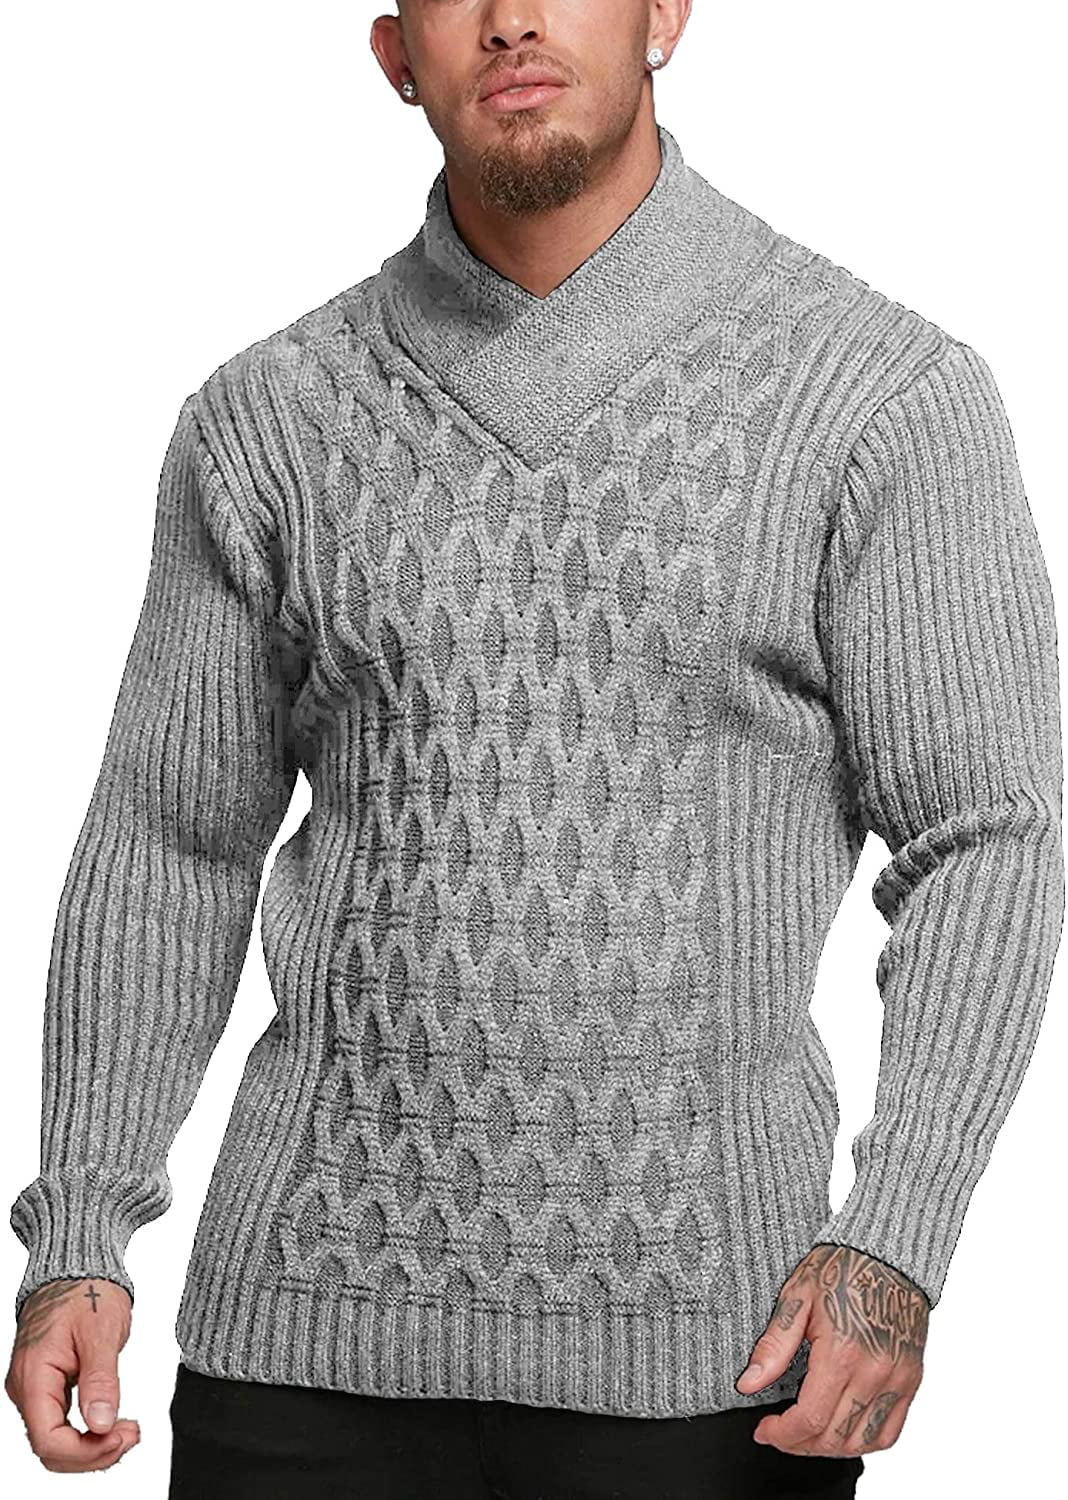 COOFANDY Mens Knitted Pullover Sweater Cable Knit Jumper Stylish Knitwear Lightweight Sweaters 